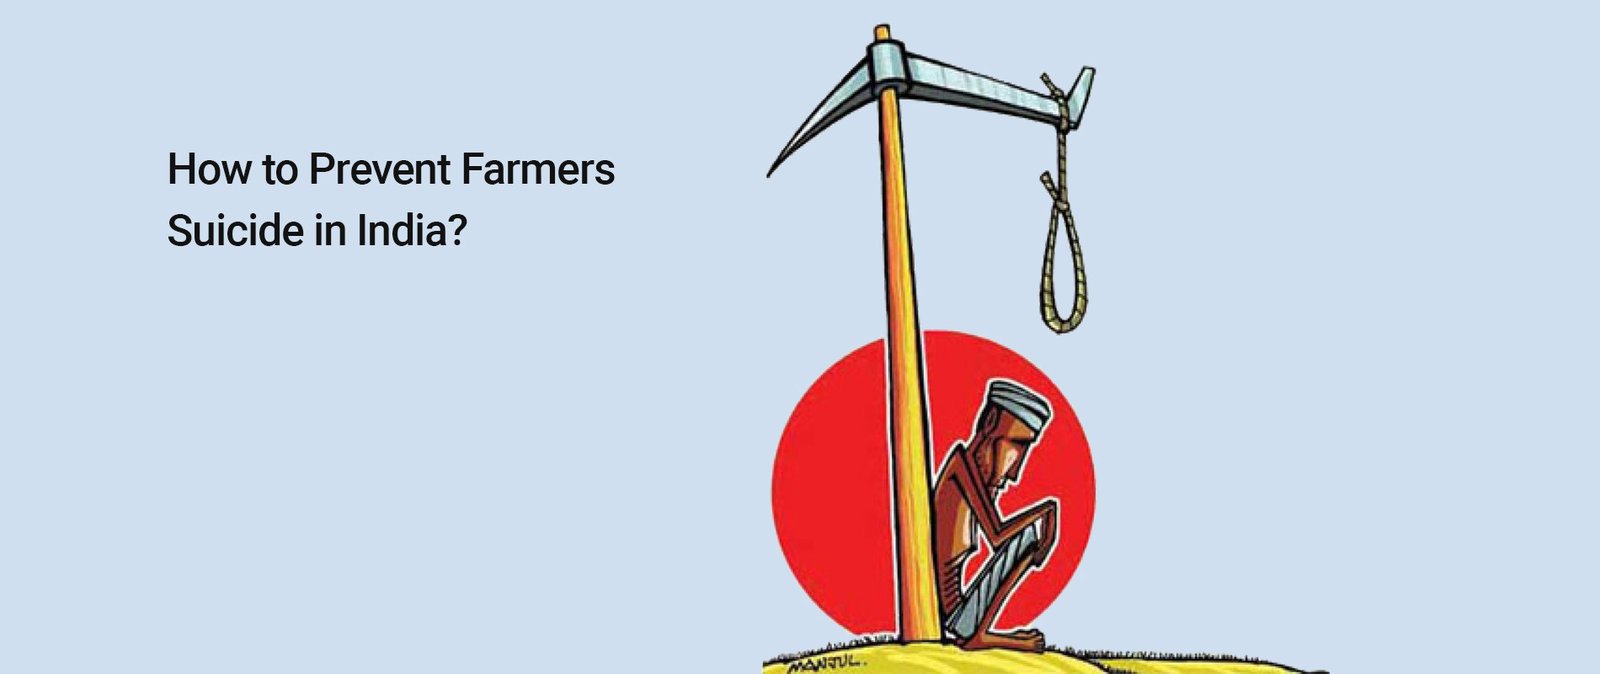 How to Prevent Farmers Suicide in India